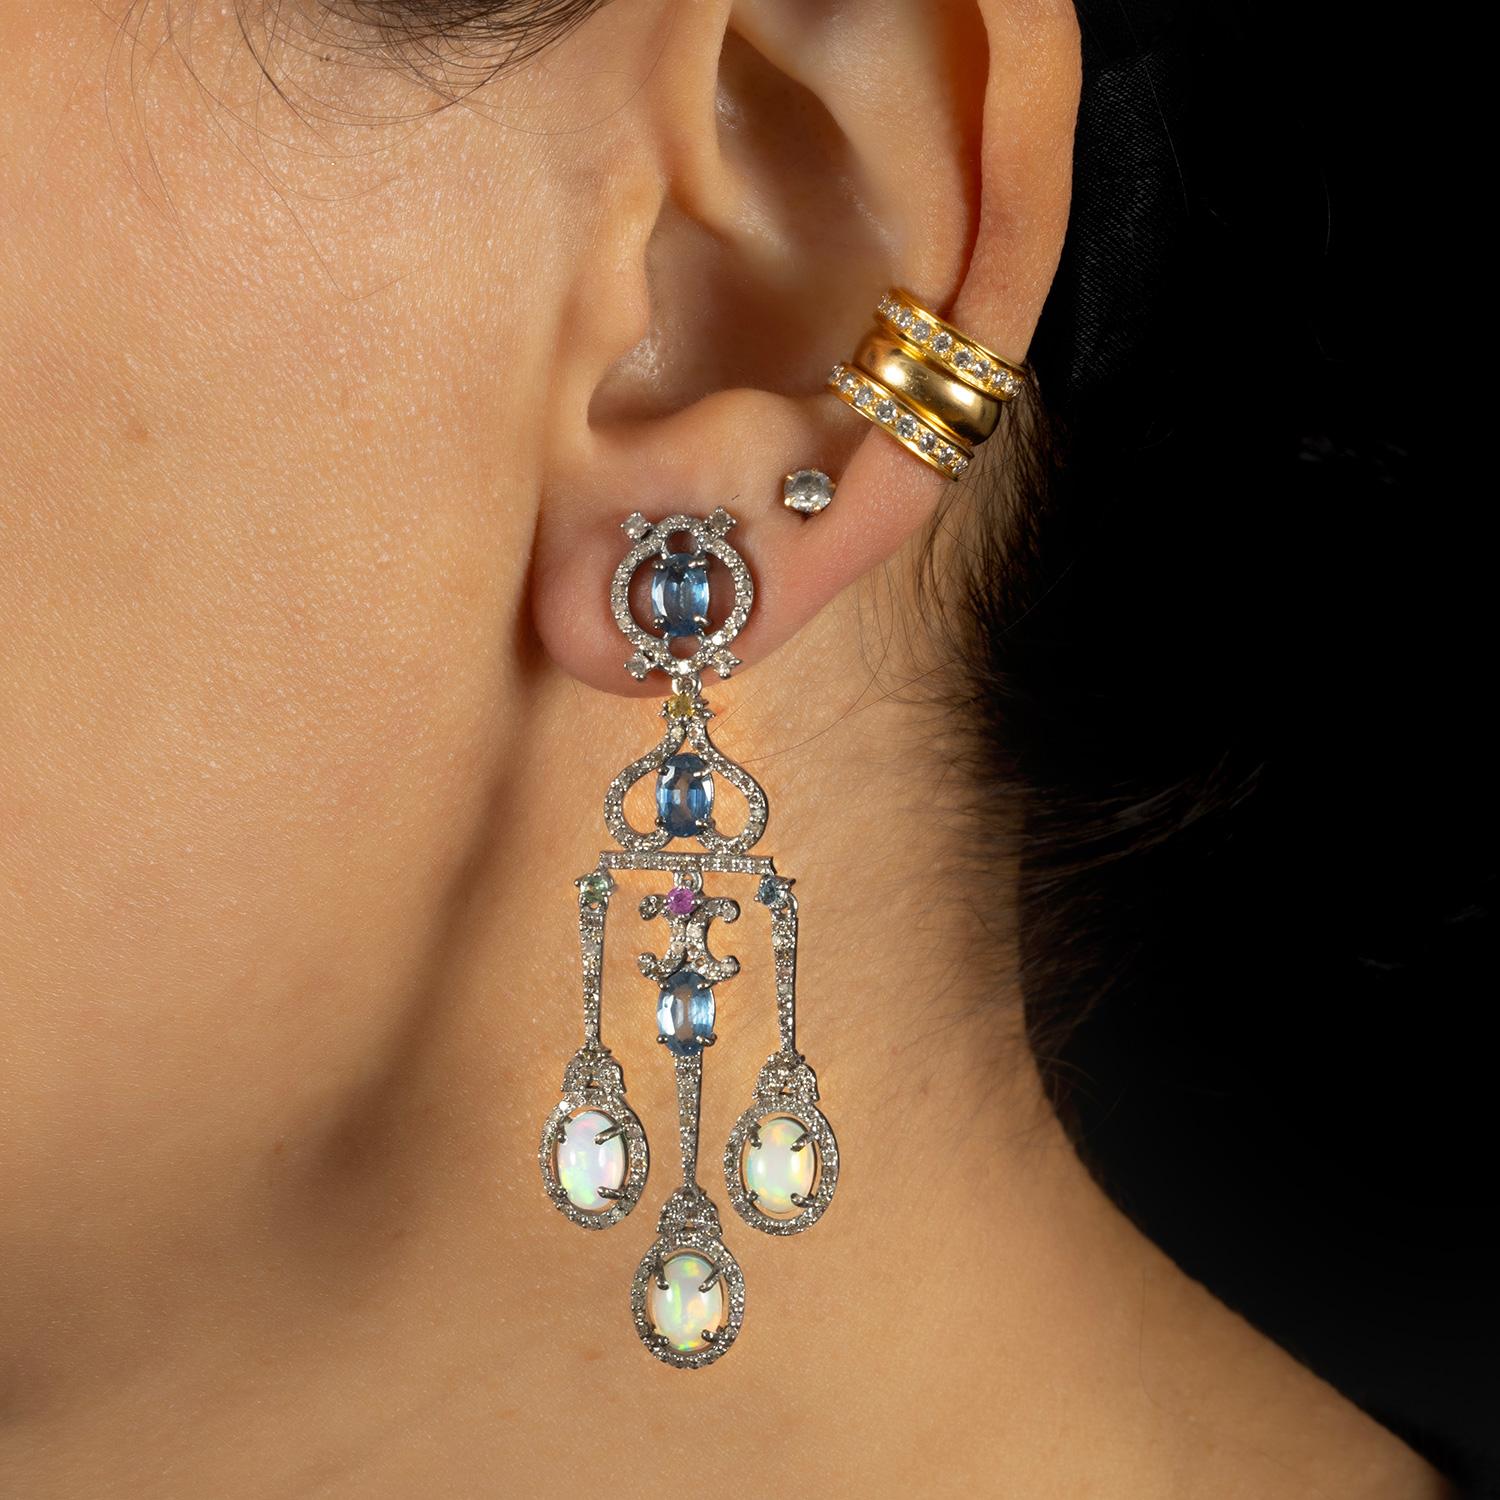 Intricately set with consciously sourced sapphire (4.15 carat), opal (3.60 carat), single cut diamonds (2.8 carat) on a mix of silver and 14kt gold; with an elegant fluid movement to them. Notice the two small ruby stone detailing in the